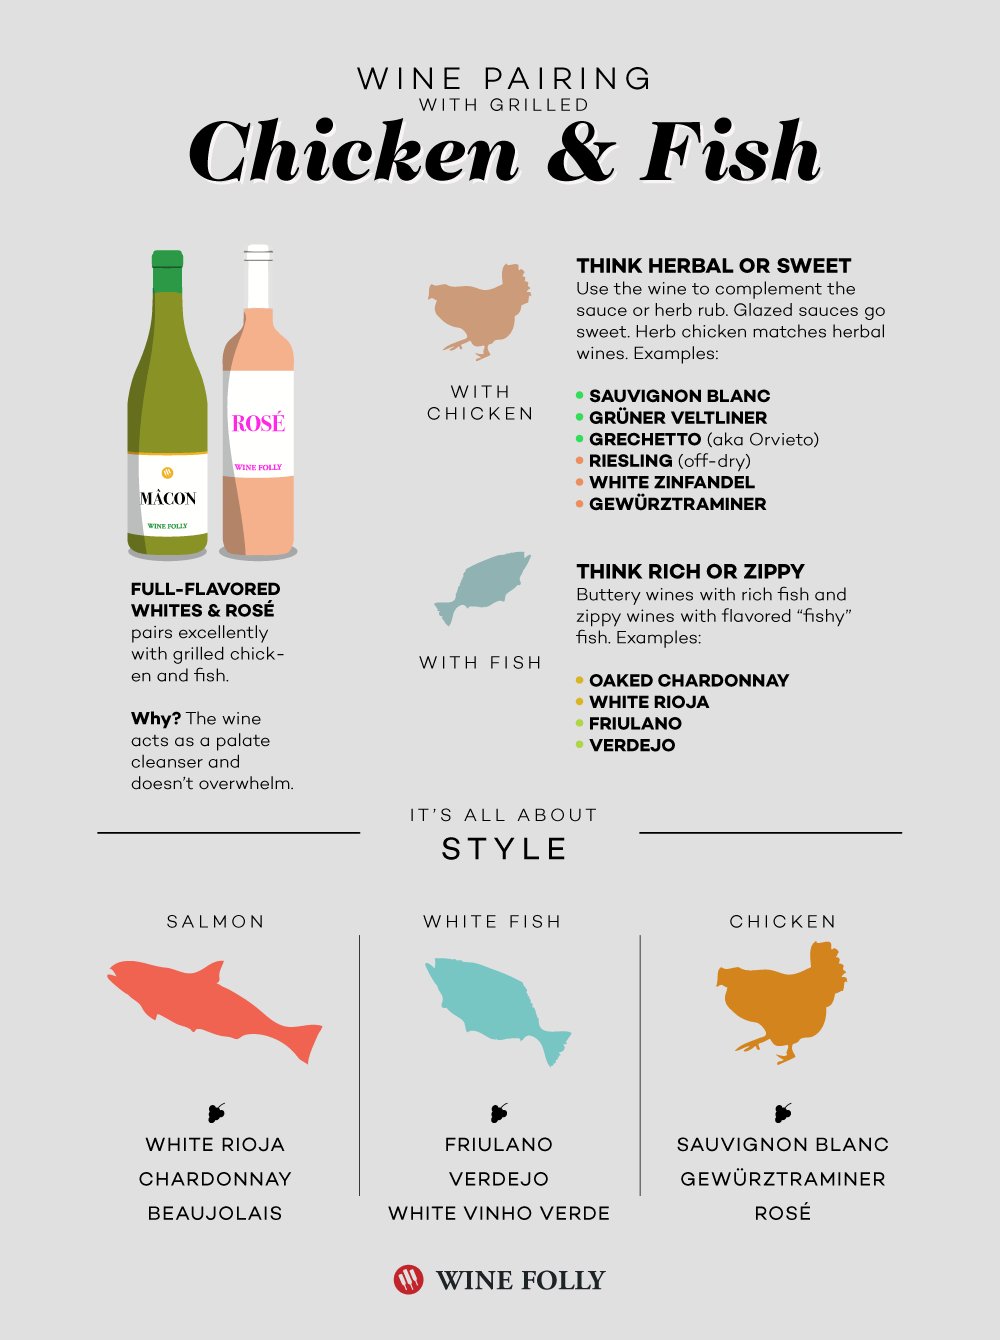 Food and Wine Pairings with Grilled Chicken and Fish BBQ by Wine Folly